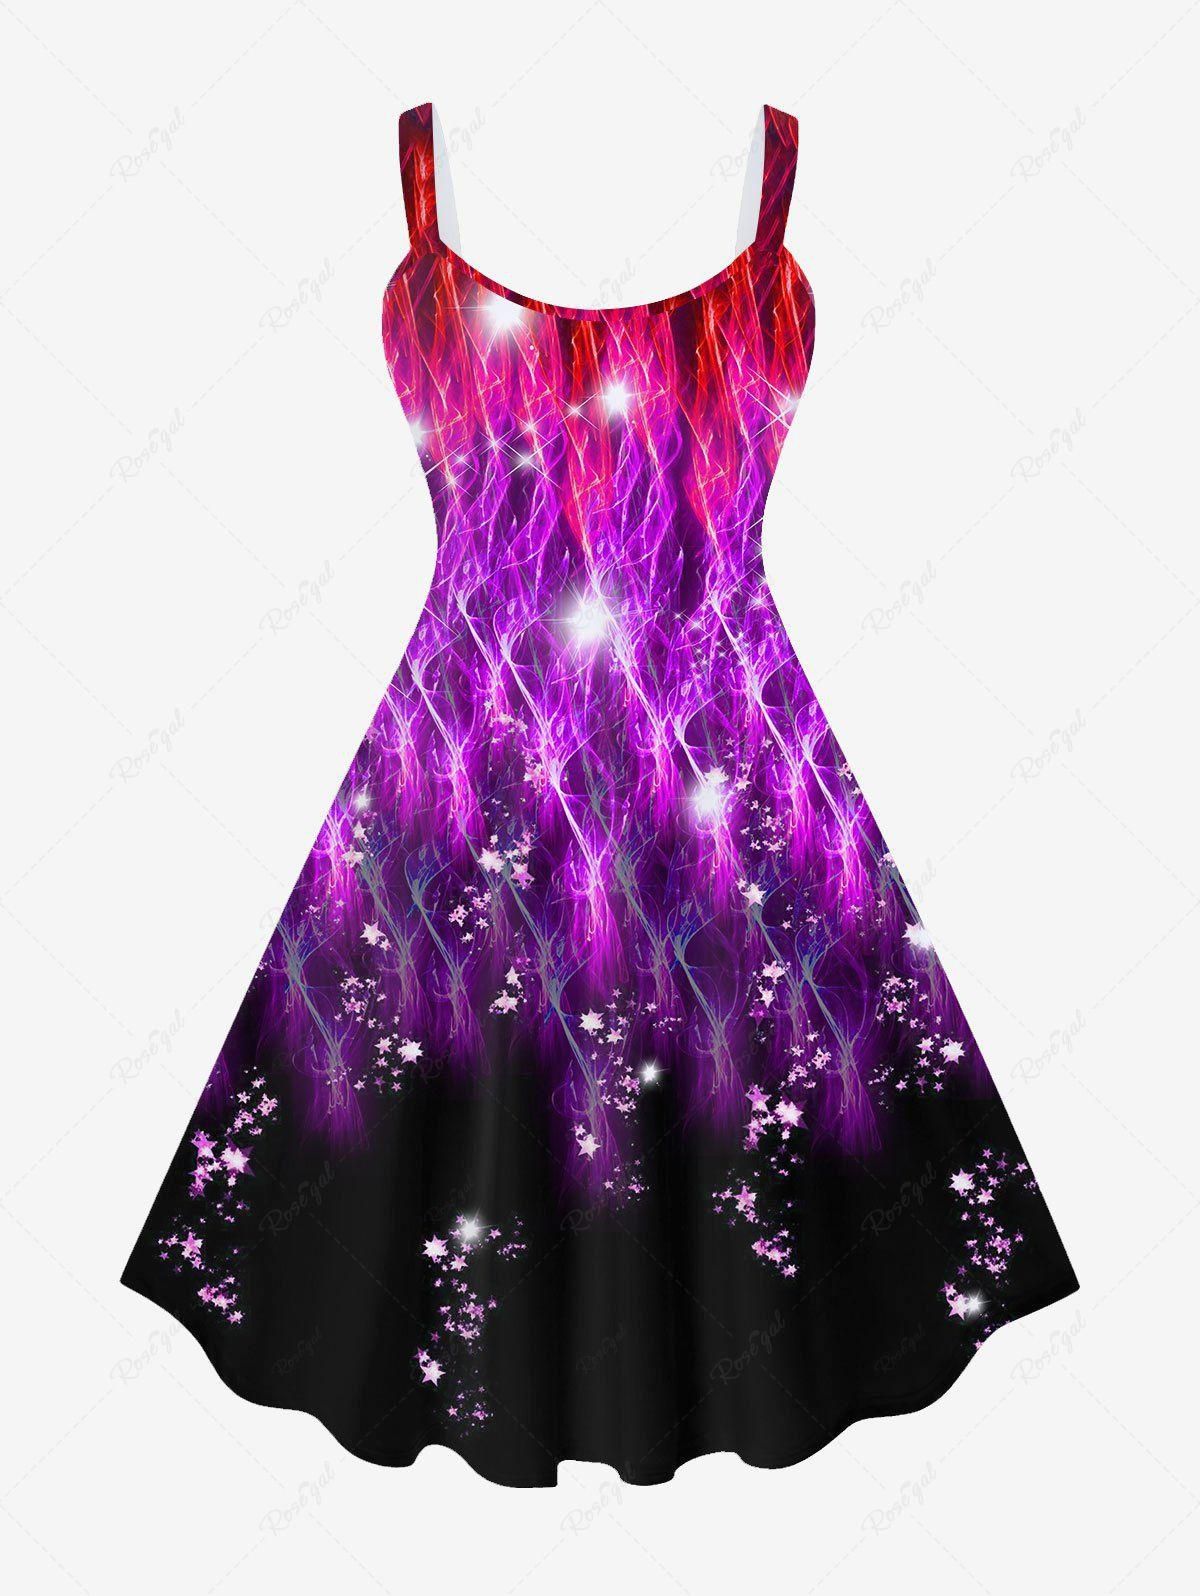 Plus Size Glitter Sparkling Floral Light Beam Colorblock Print A Line Ombre Tank Party New Years Eve Dress - L